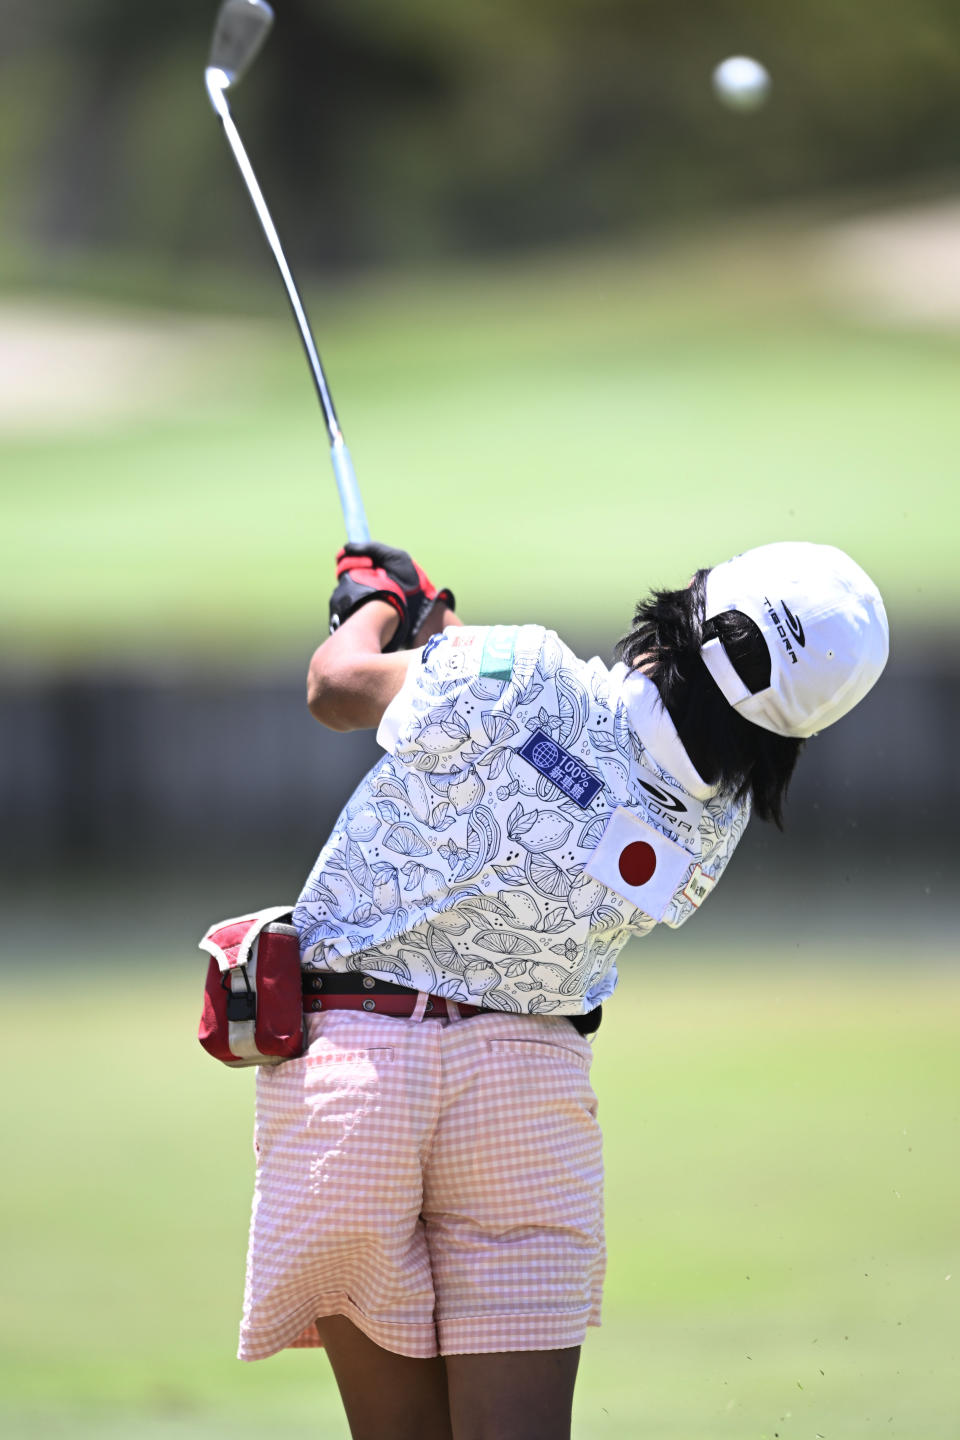 Miroku Suto follows through on her tee shot on the sixth hole during the final round of the Junior World Championships golf tournament held at Singing Hills Golf Resort on Thursday, July 14, 2022, in El Cajon, Calif. (AP Photo/Denis Poroy)